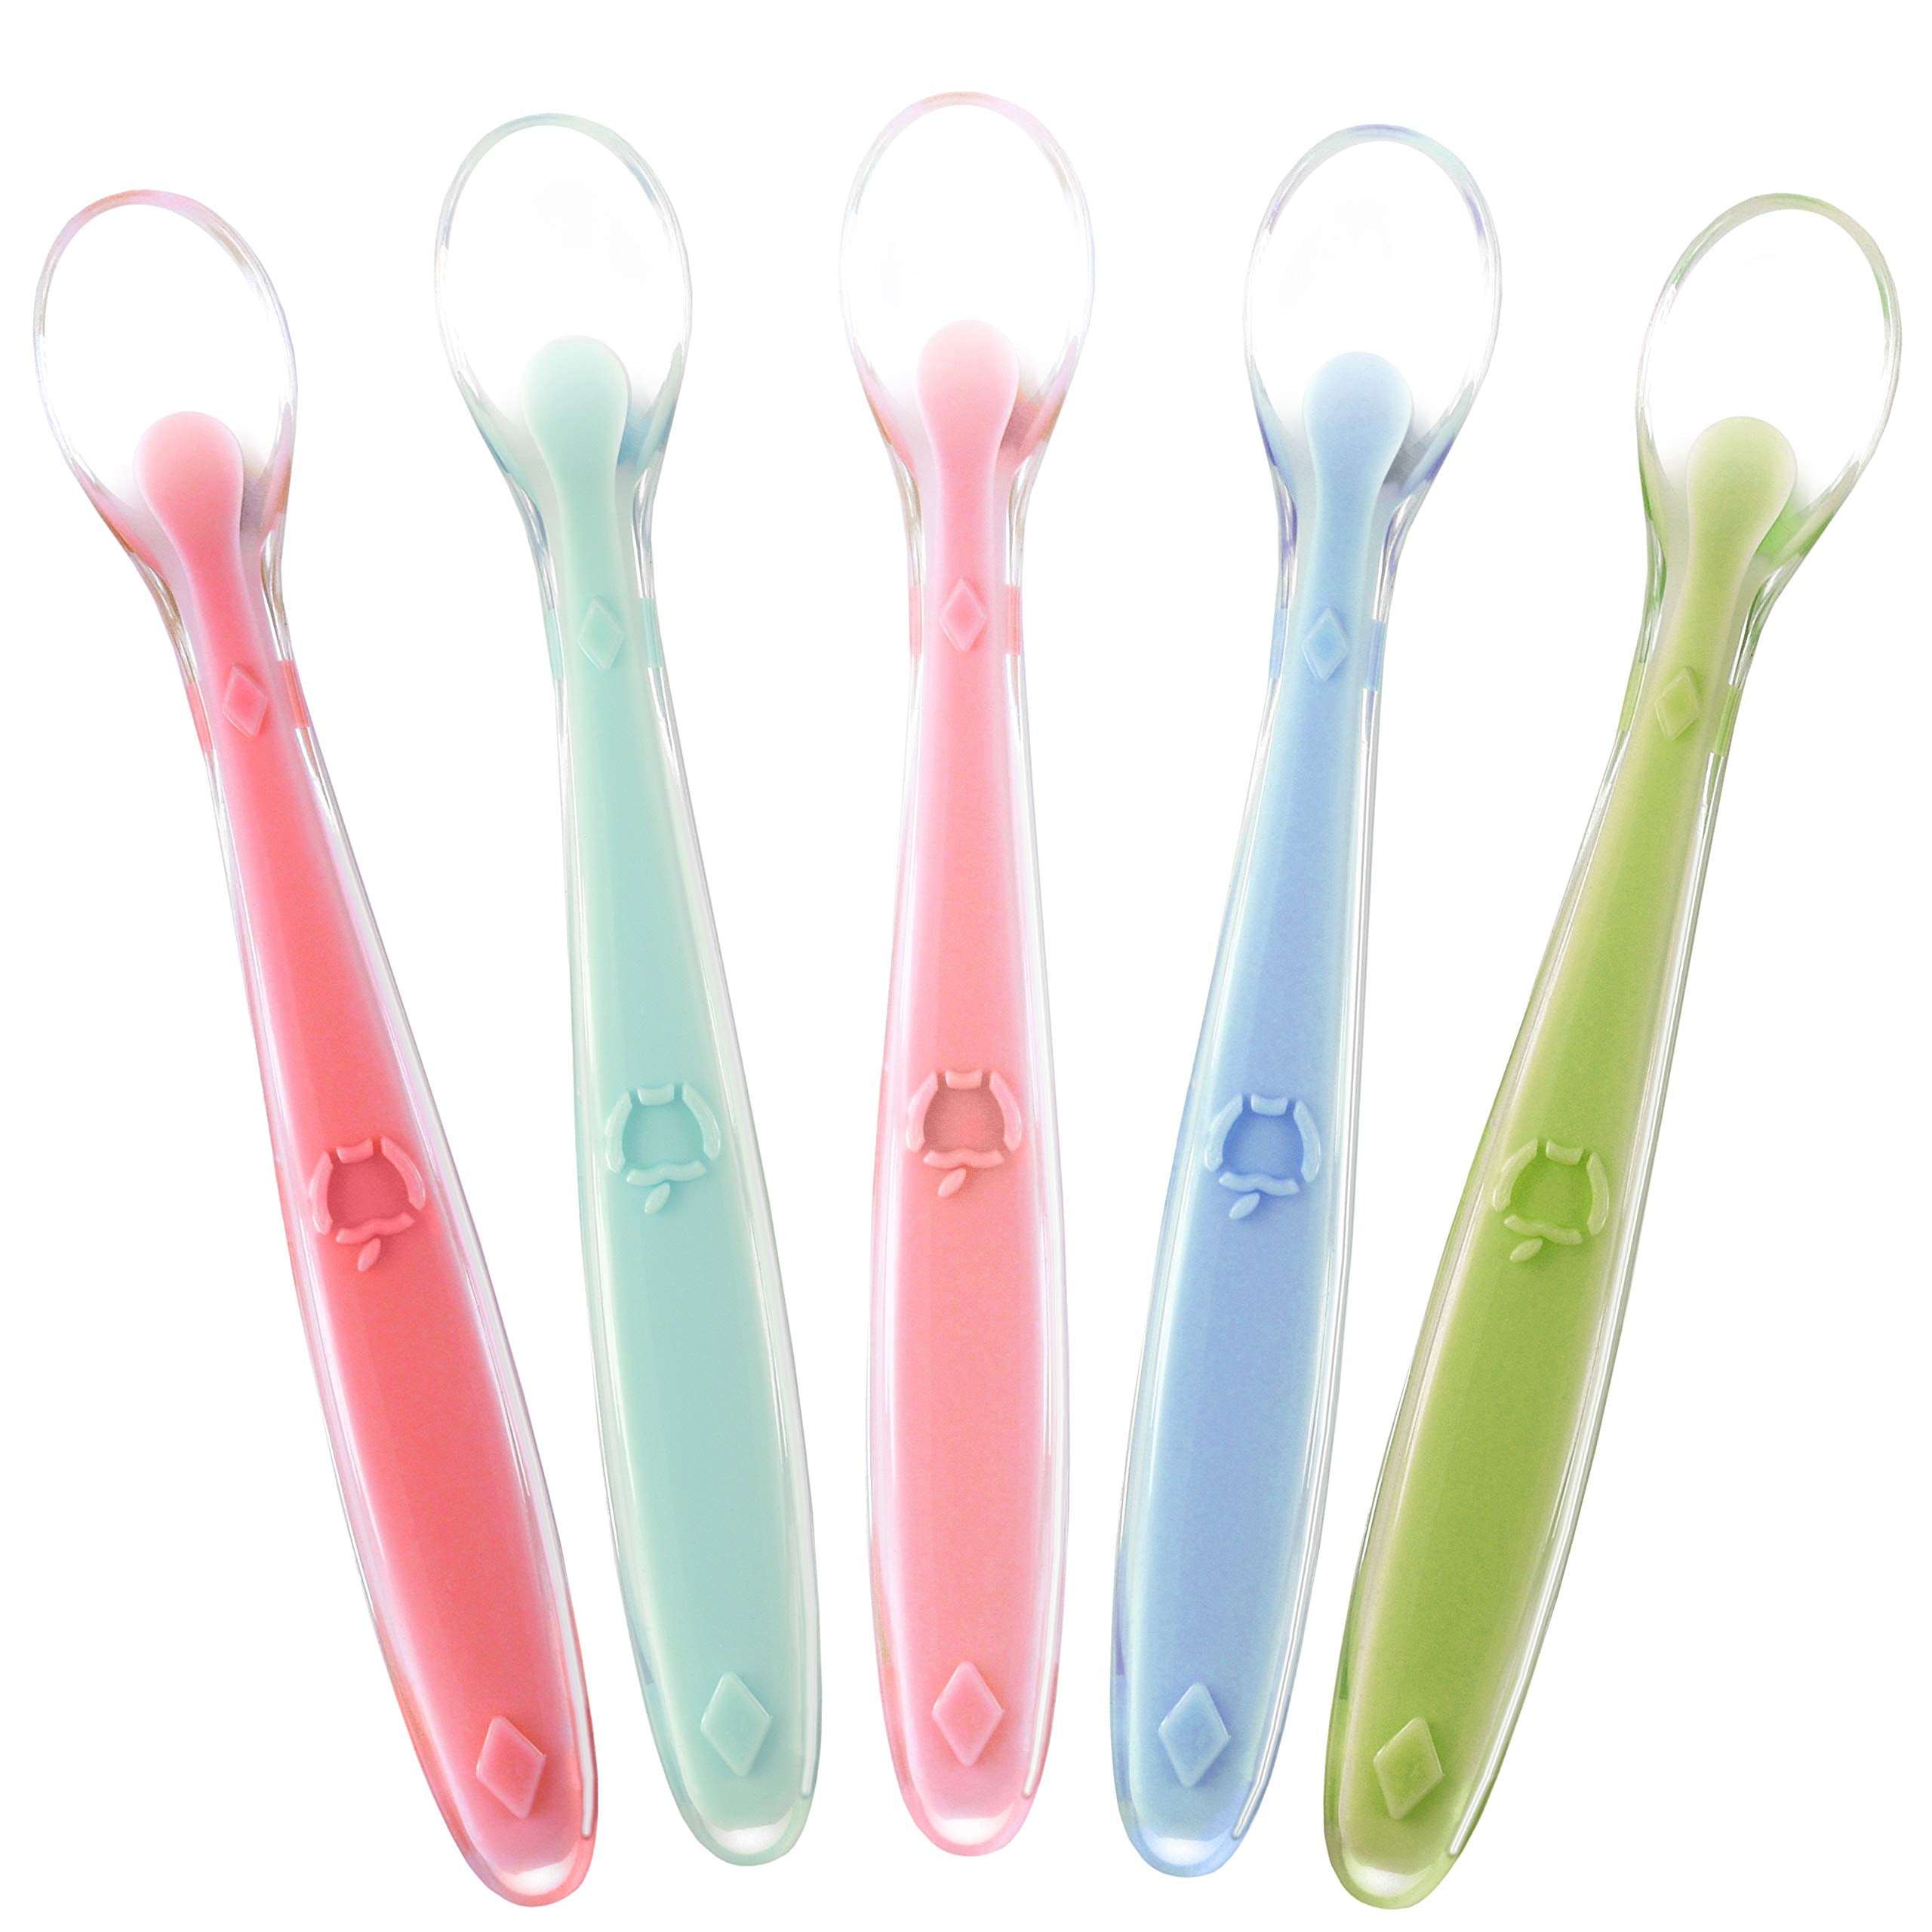 Silicone Baby Spoons First Stage Baby Feeding Spoons Stage 1 and Stage –  Sperric Little World